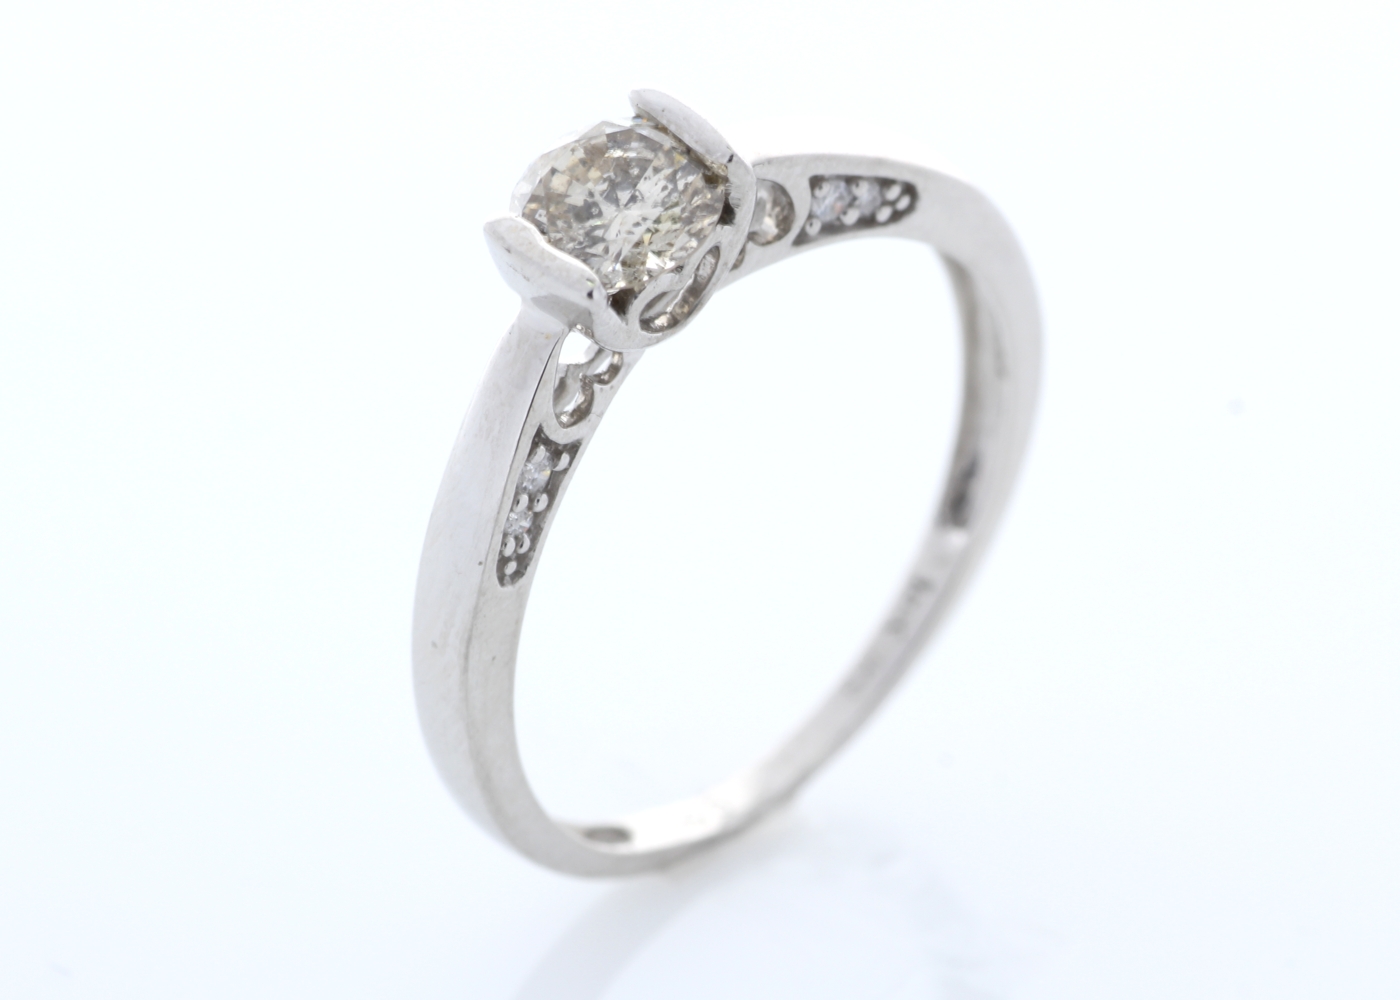 18ct White Gold Single Stone With Stone Set Shoulders Diamond Ring 0.60 Carats